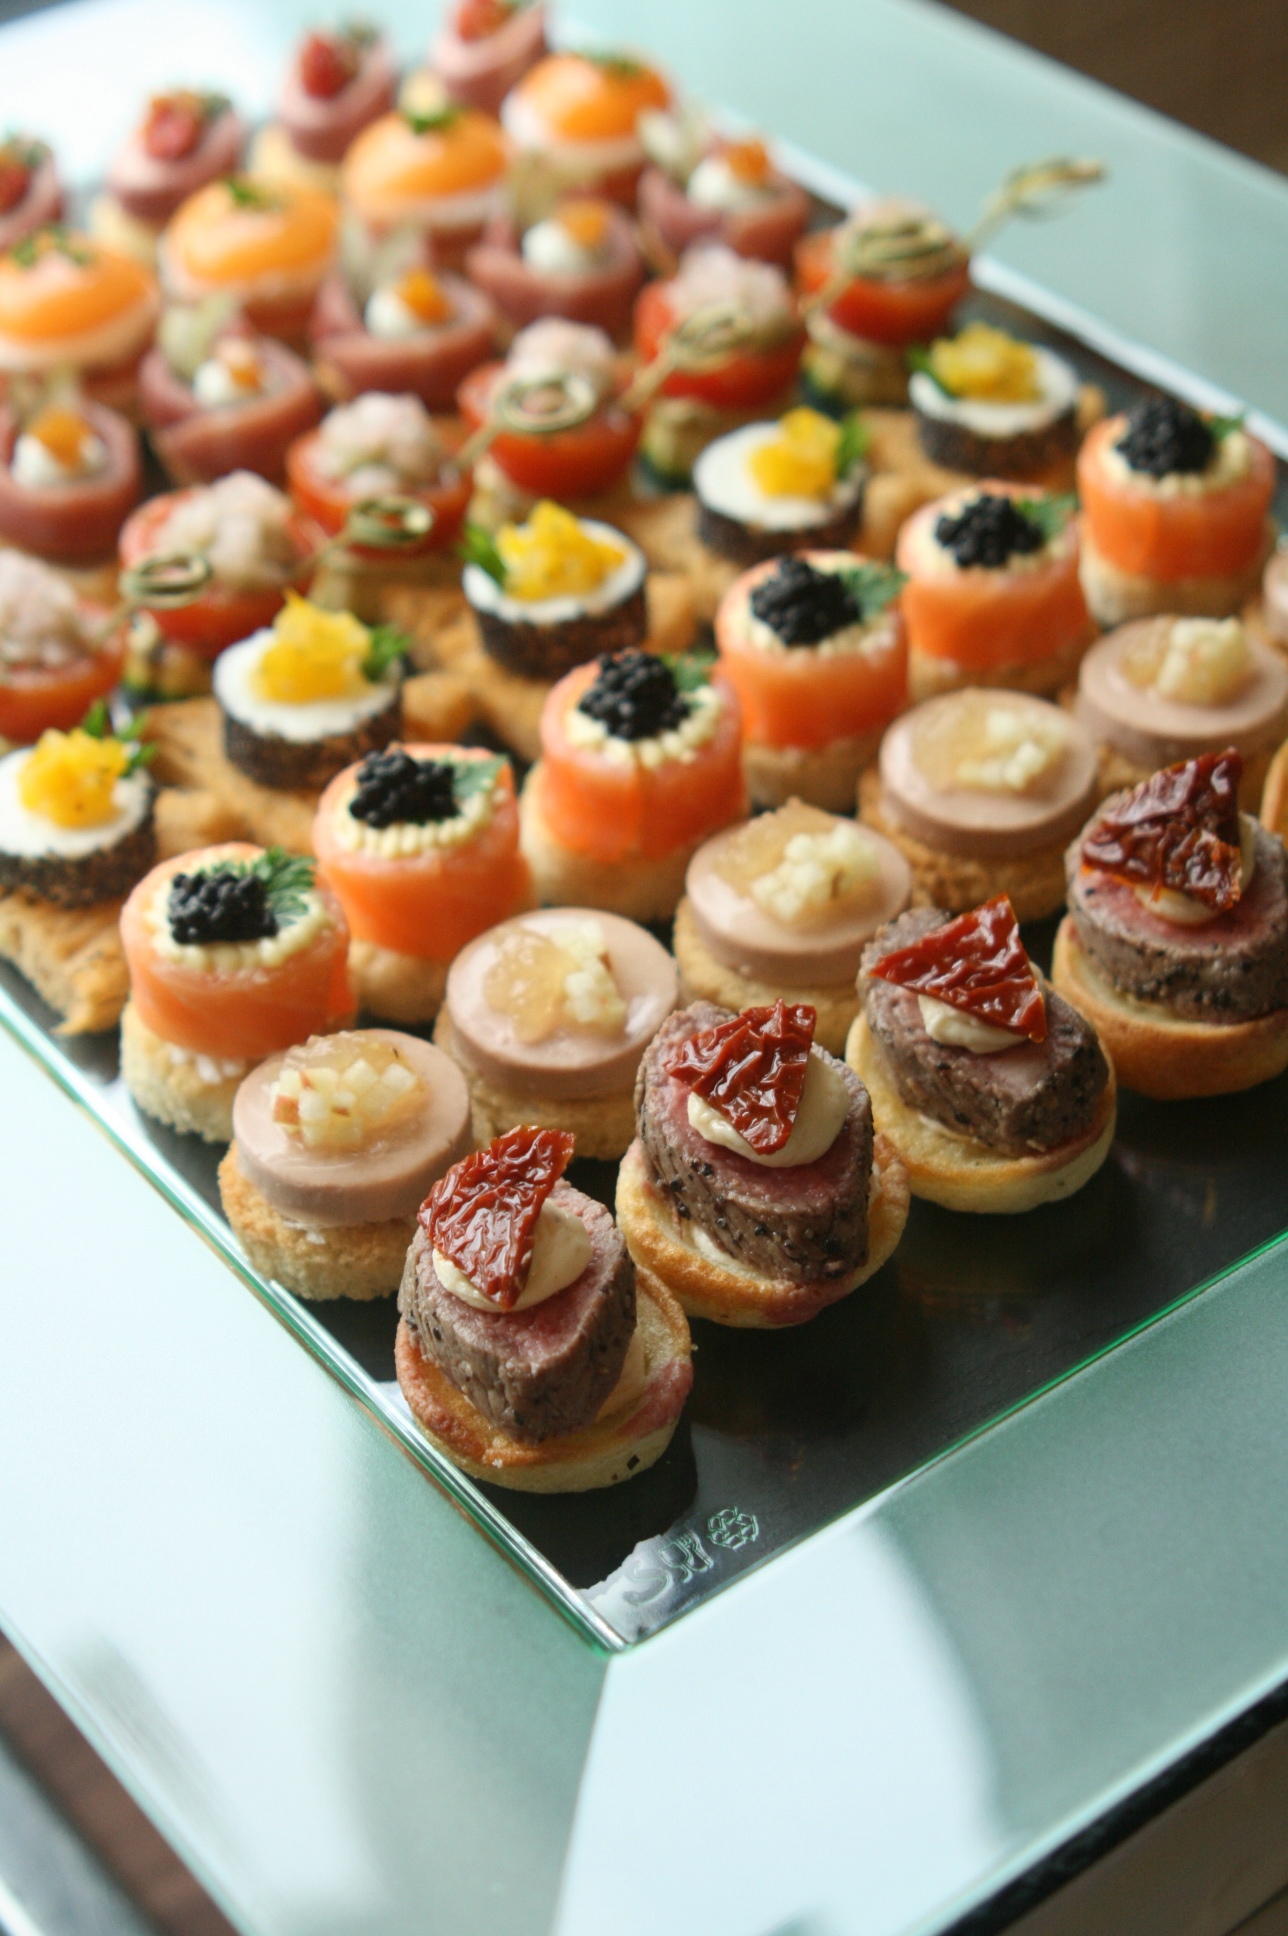 How to choose the best canapes for your next event!